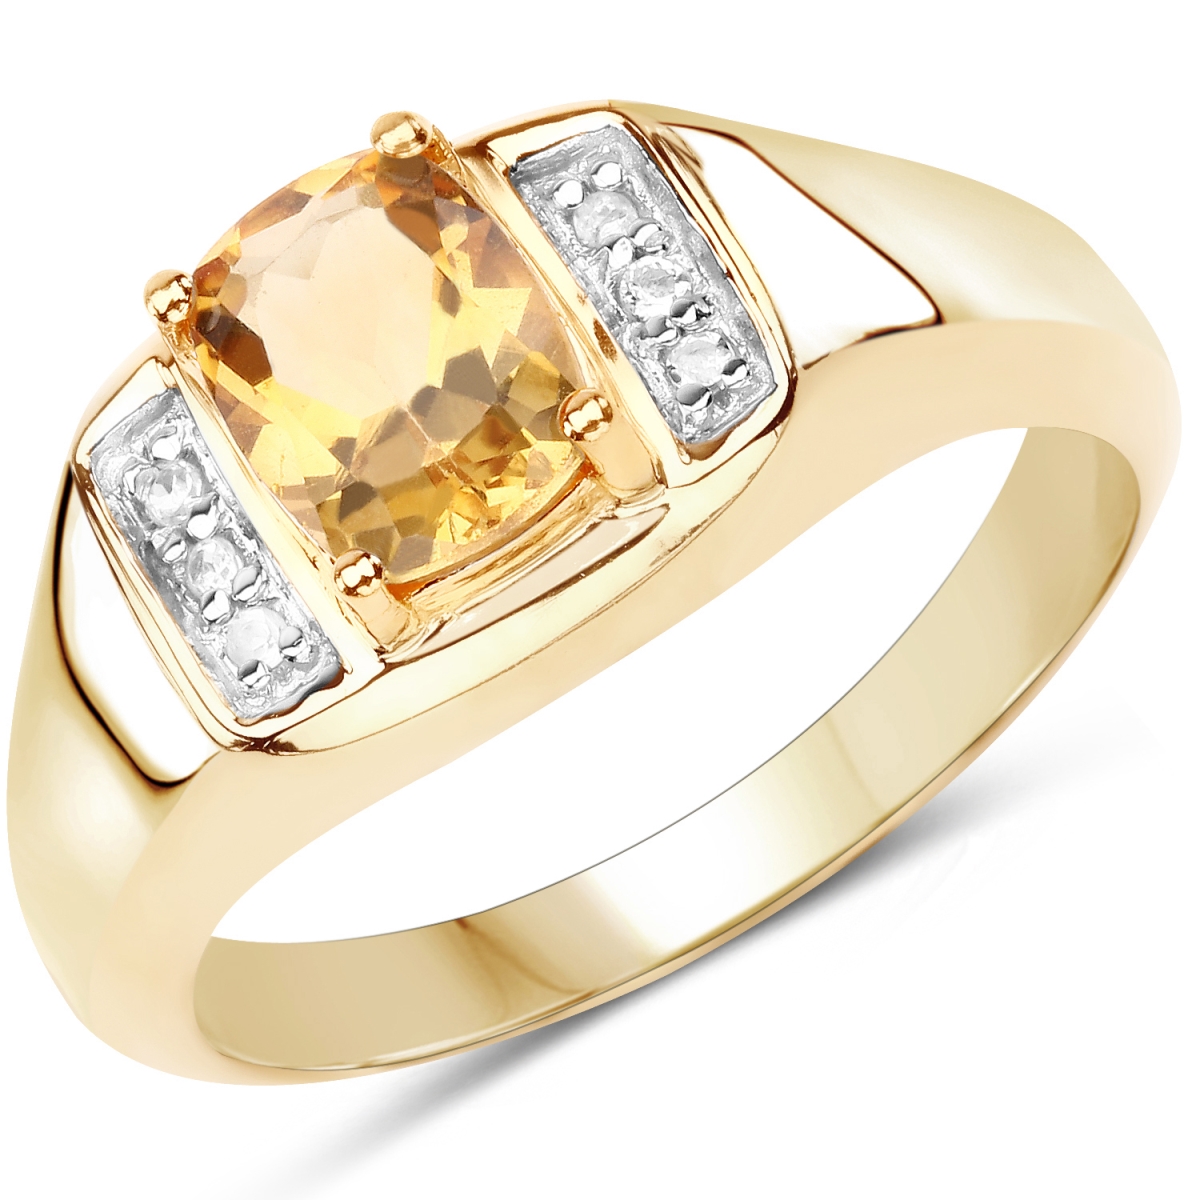 Picture of Malaika QR9437MCWT-SS14KY-11 14K Yellow Gold Plated 1.36 Carat Genuine Citrine & White Topaz 0.925 Sterling Silver Ring